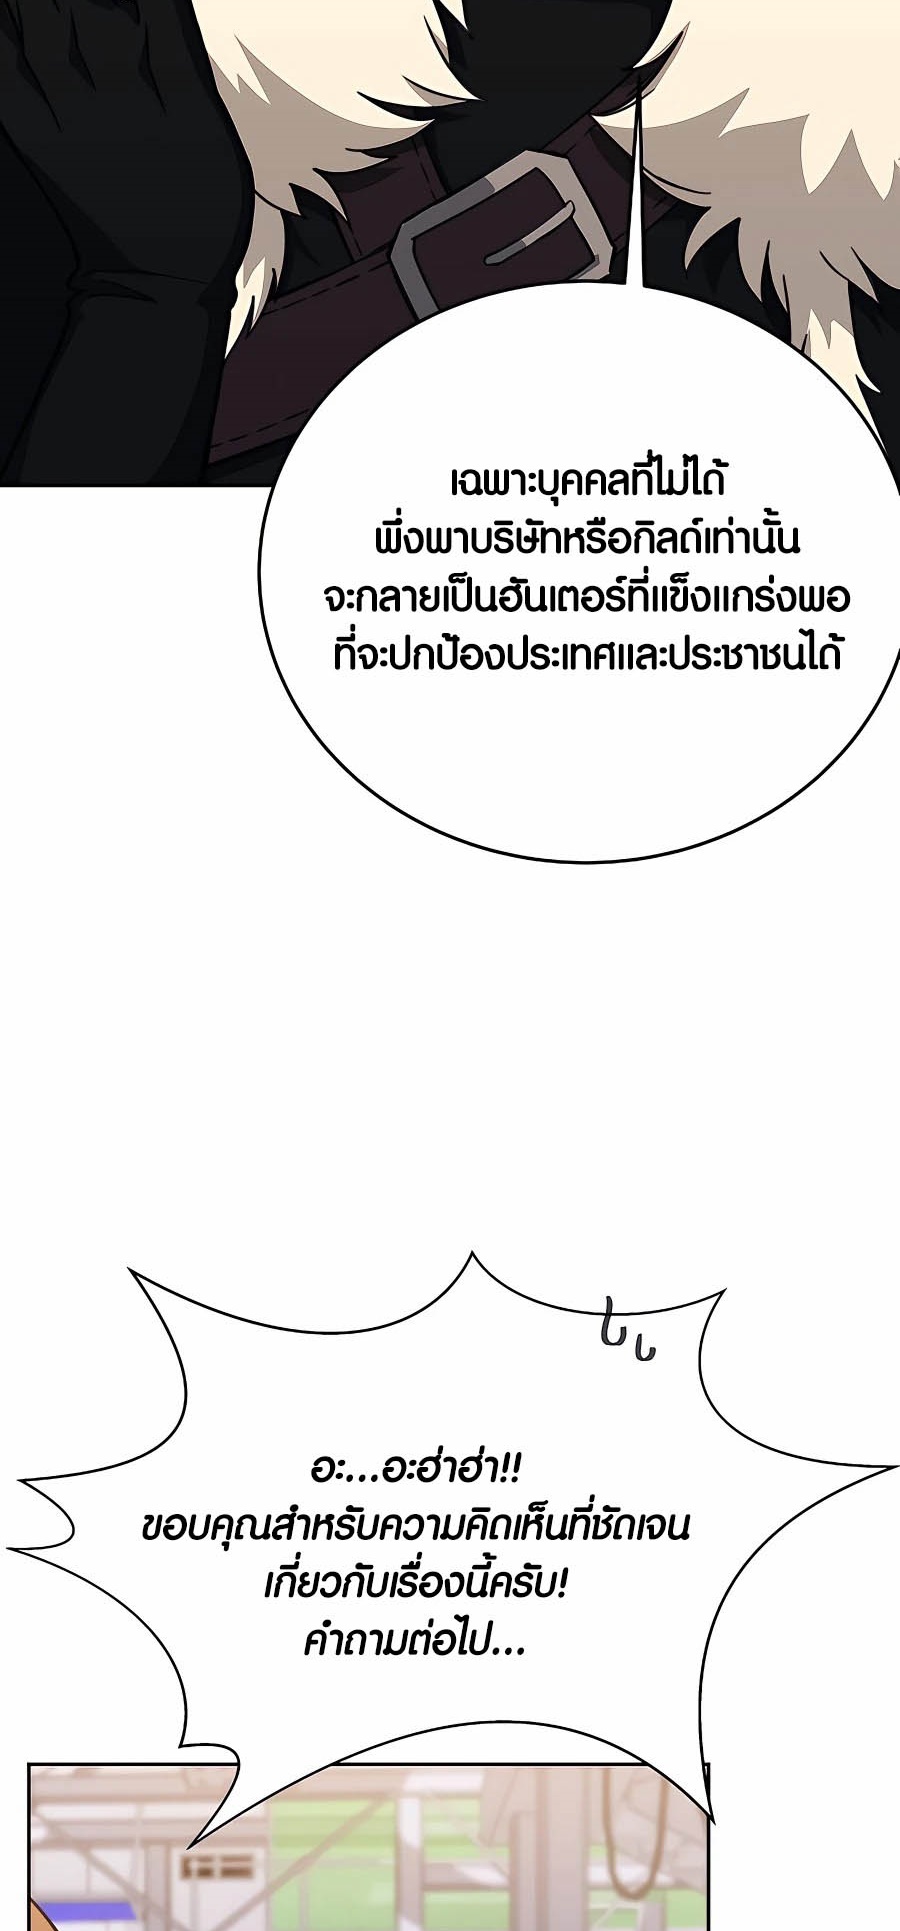 à¸­à¹ˆà¸²à¸™à¸¡à¸±à¸™à¸®à¸§à¸² à¹€à¸£à¸·à¹ˆà¸­à¸‡ The Part Time Land of the Gods 56 08